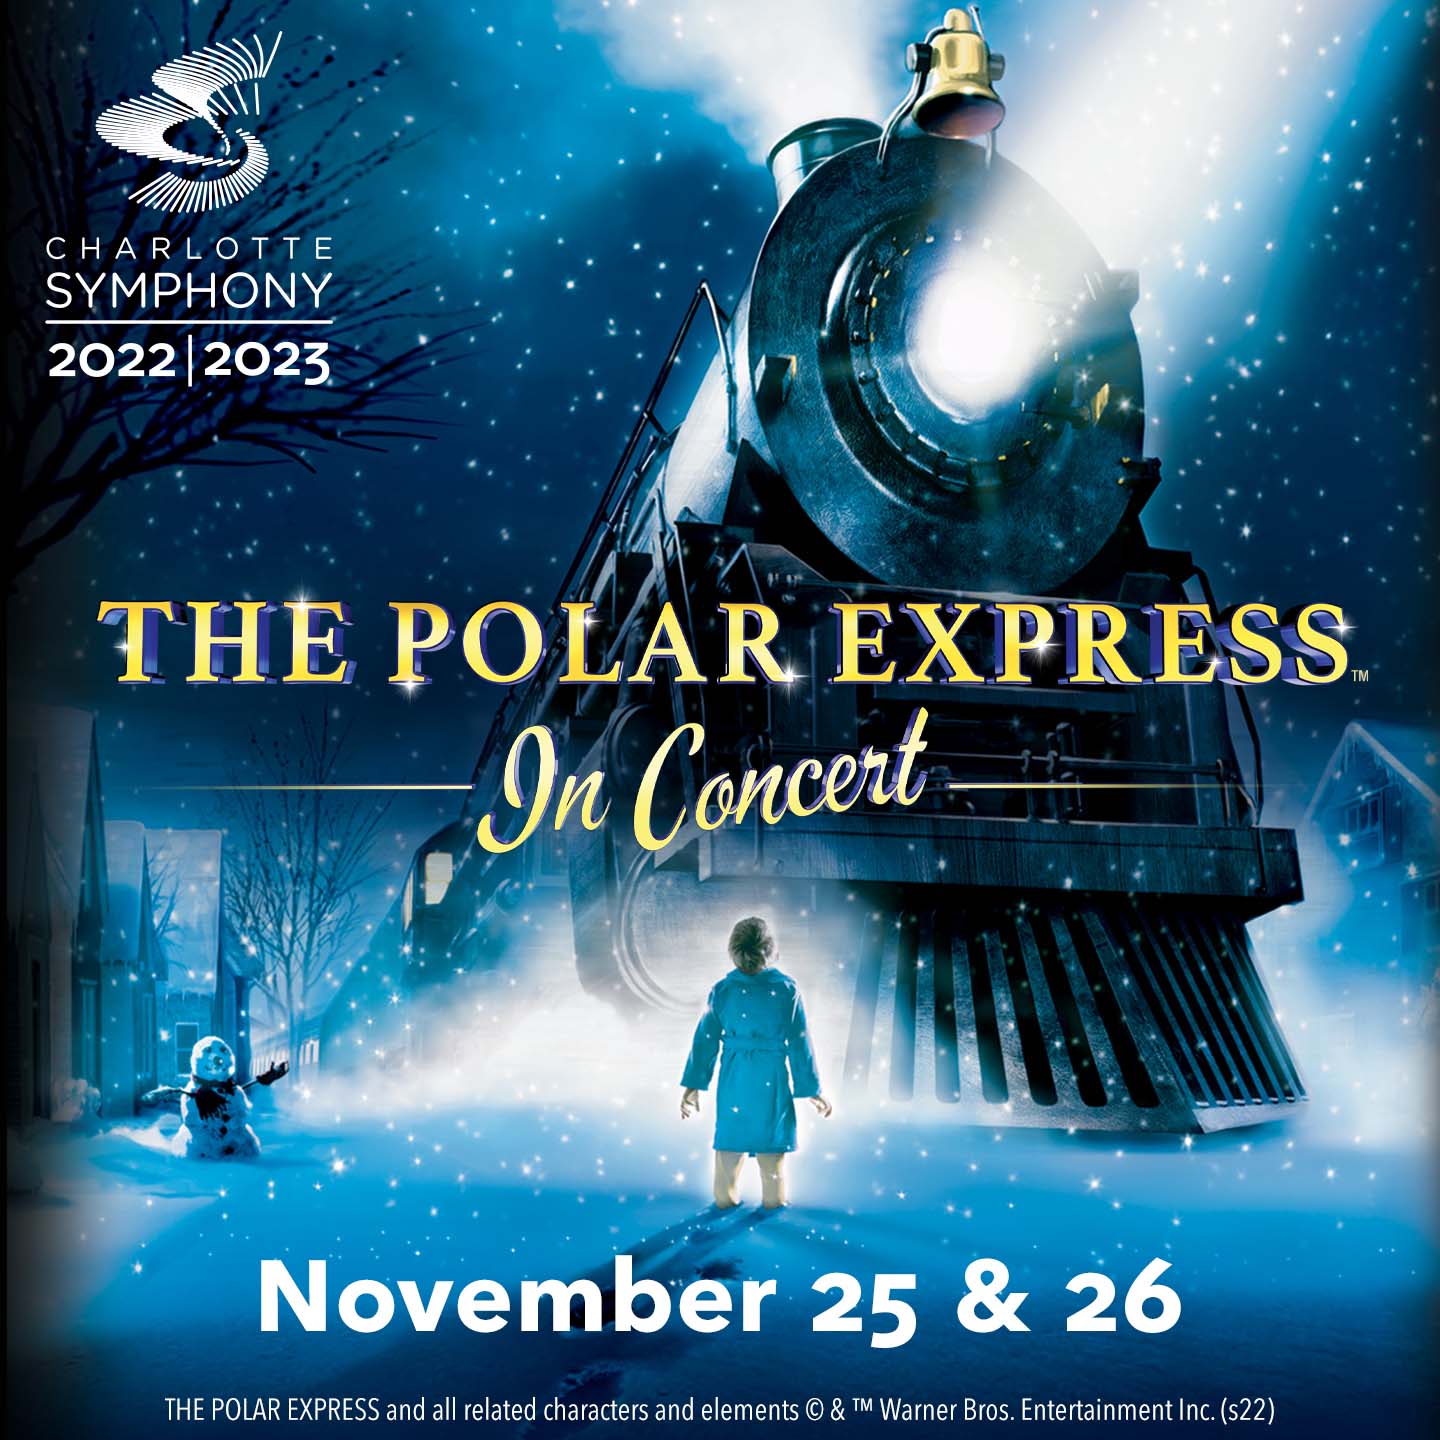 CHARLOTTE SYMPHONY: The Polar Express™ in Concert